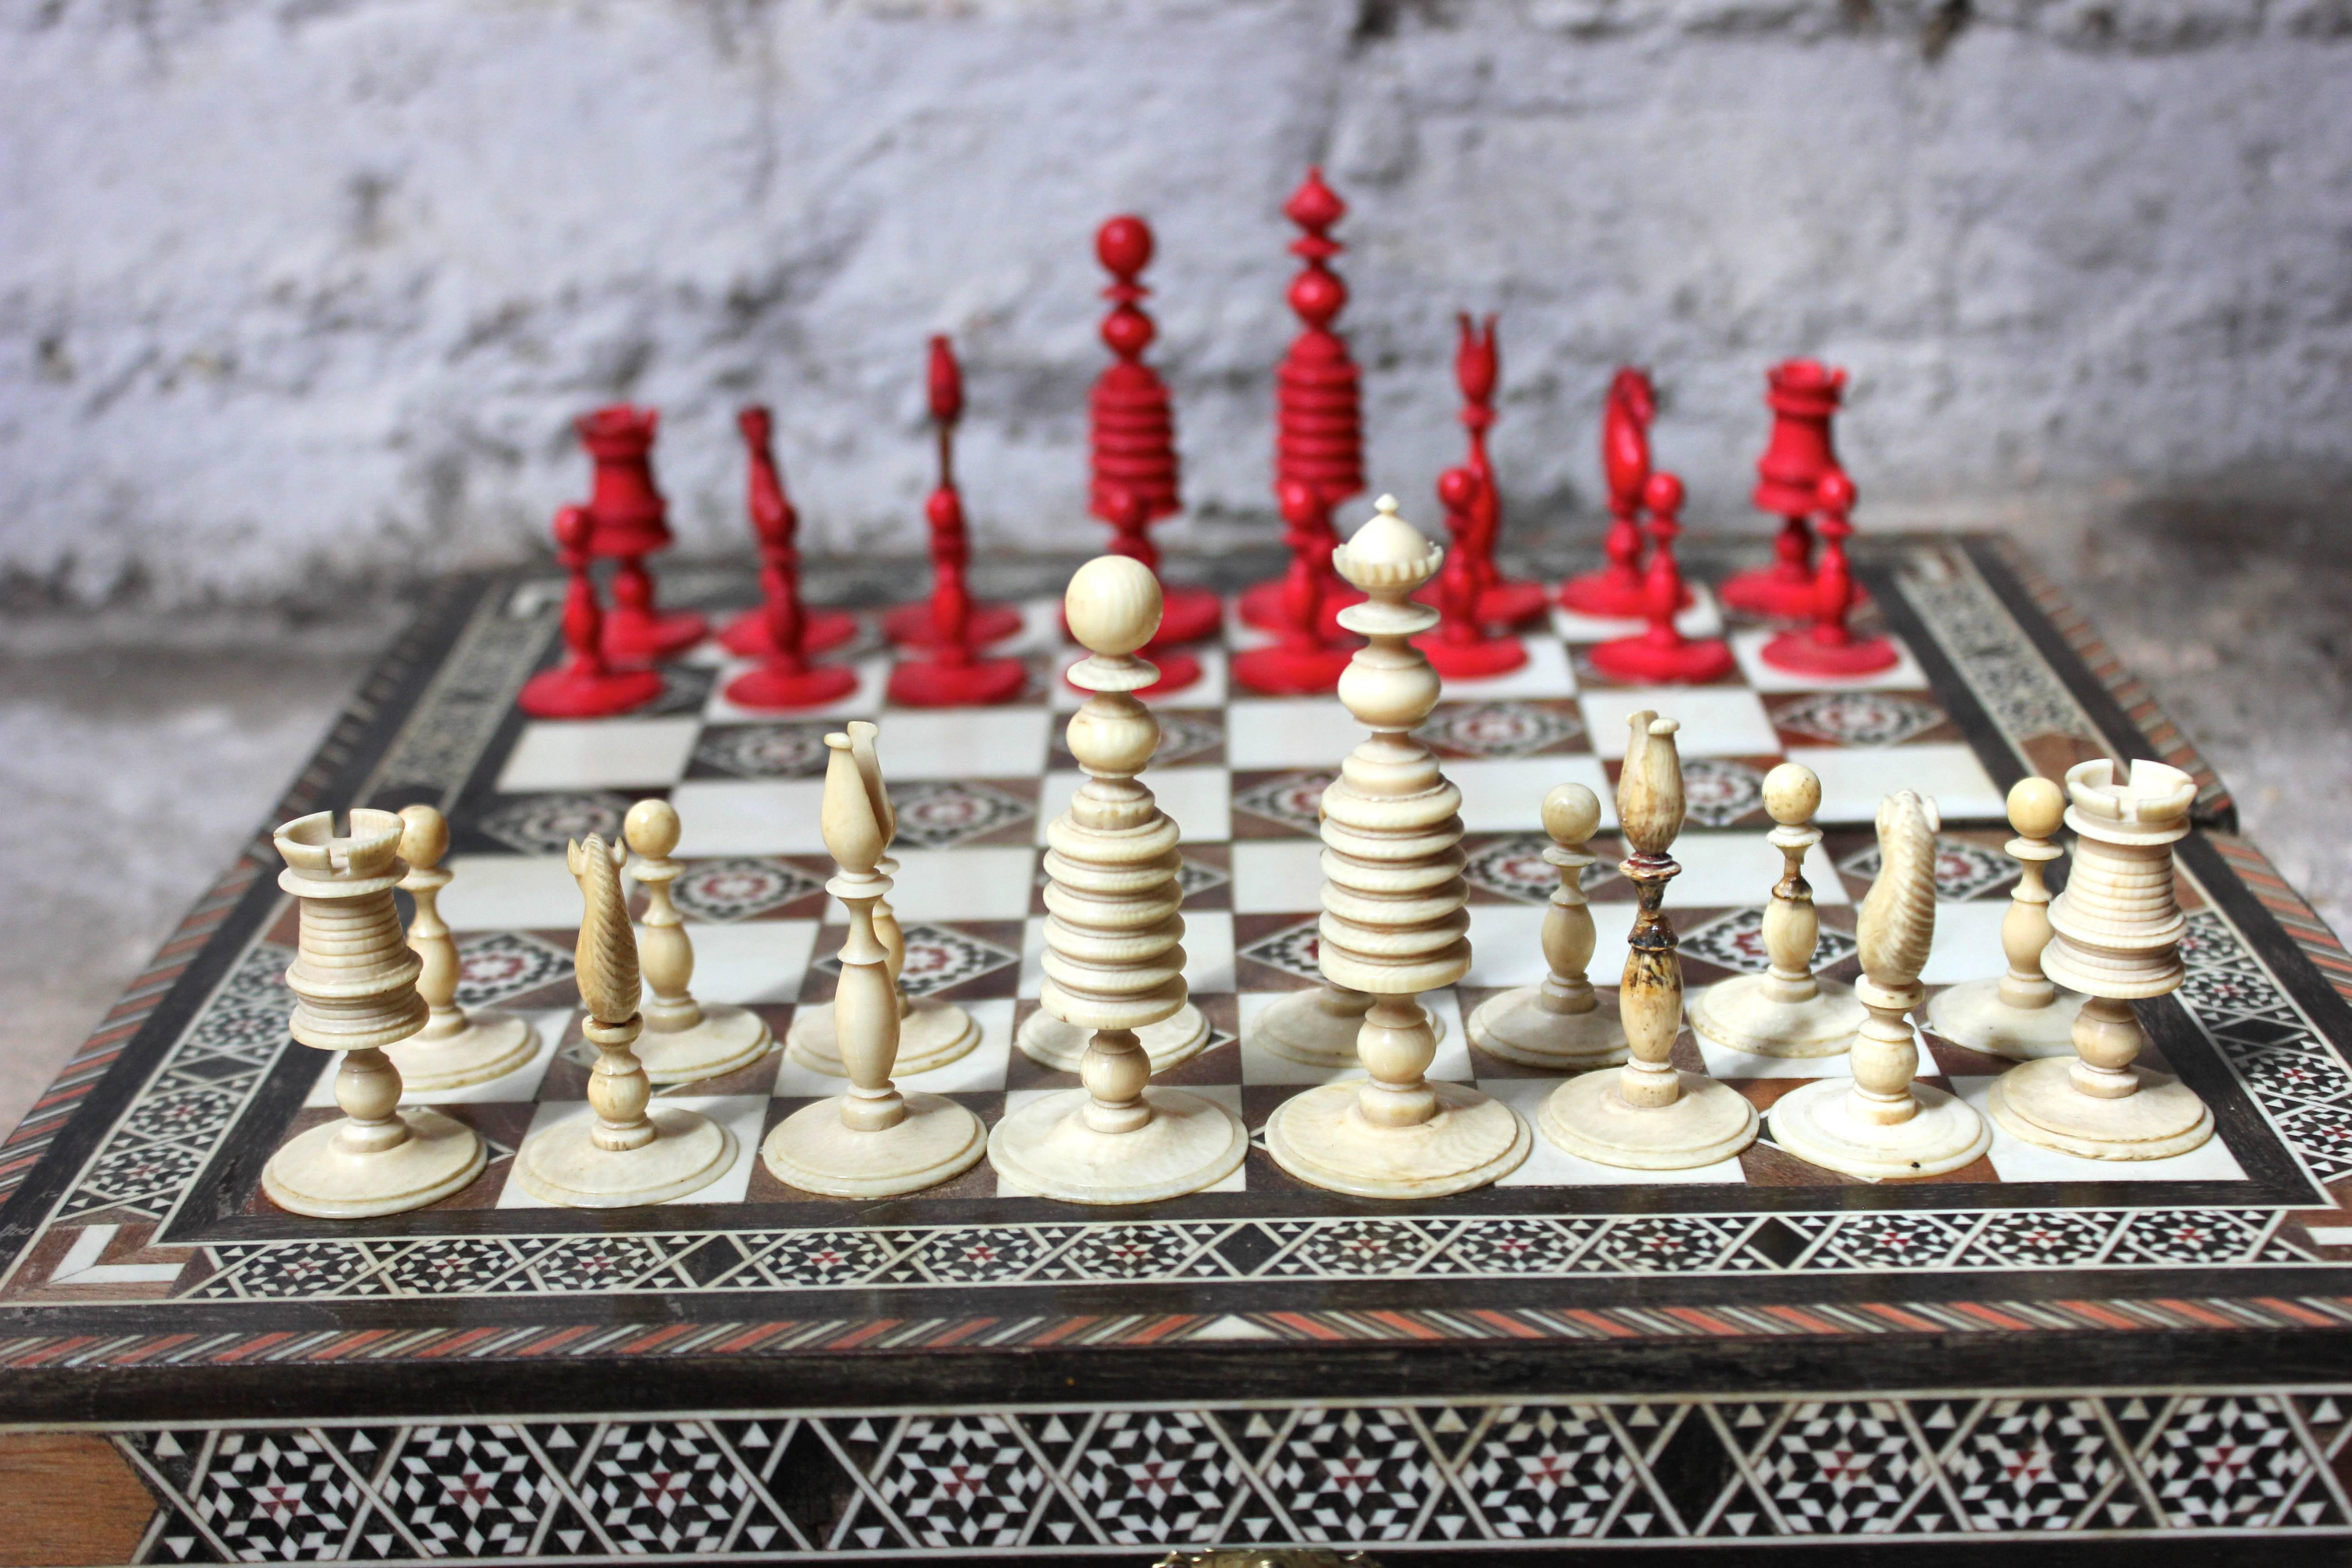 The English ivory chess set in the ‘Washington’ pattern, one side stained red, the other side remaining natural, the kings with 